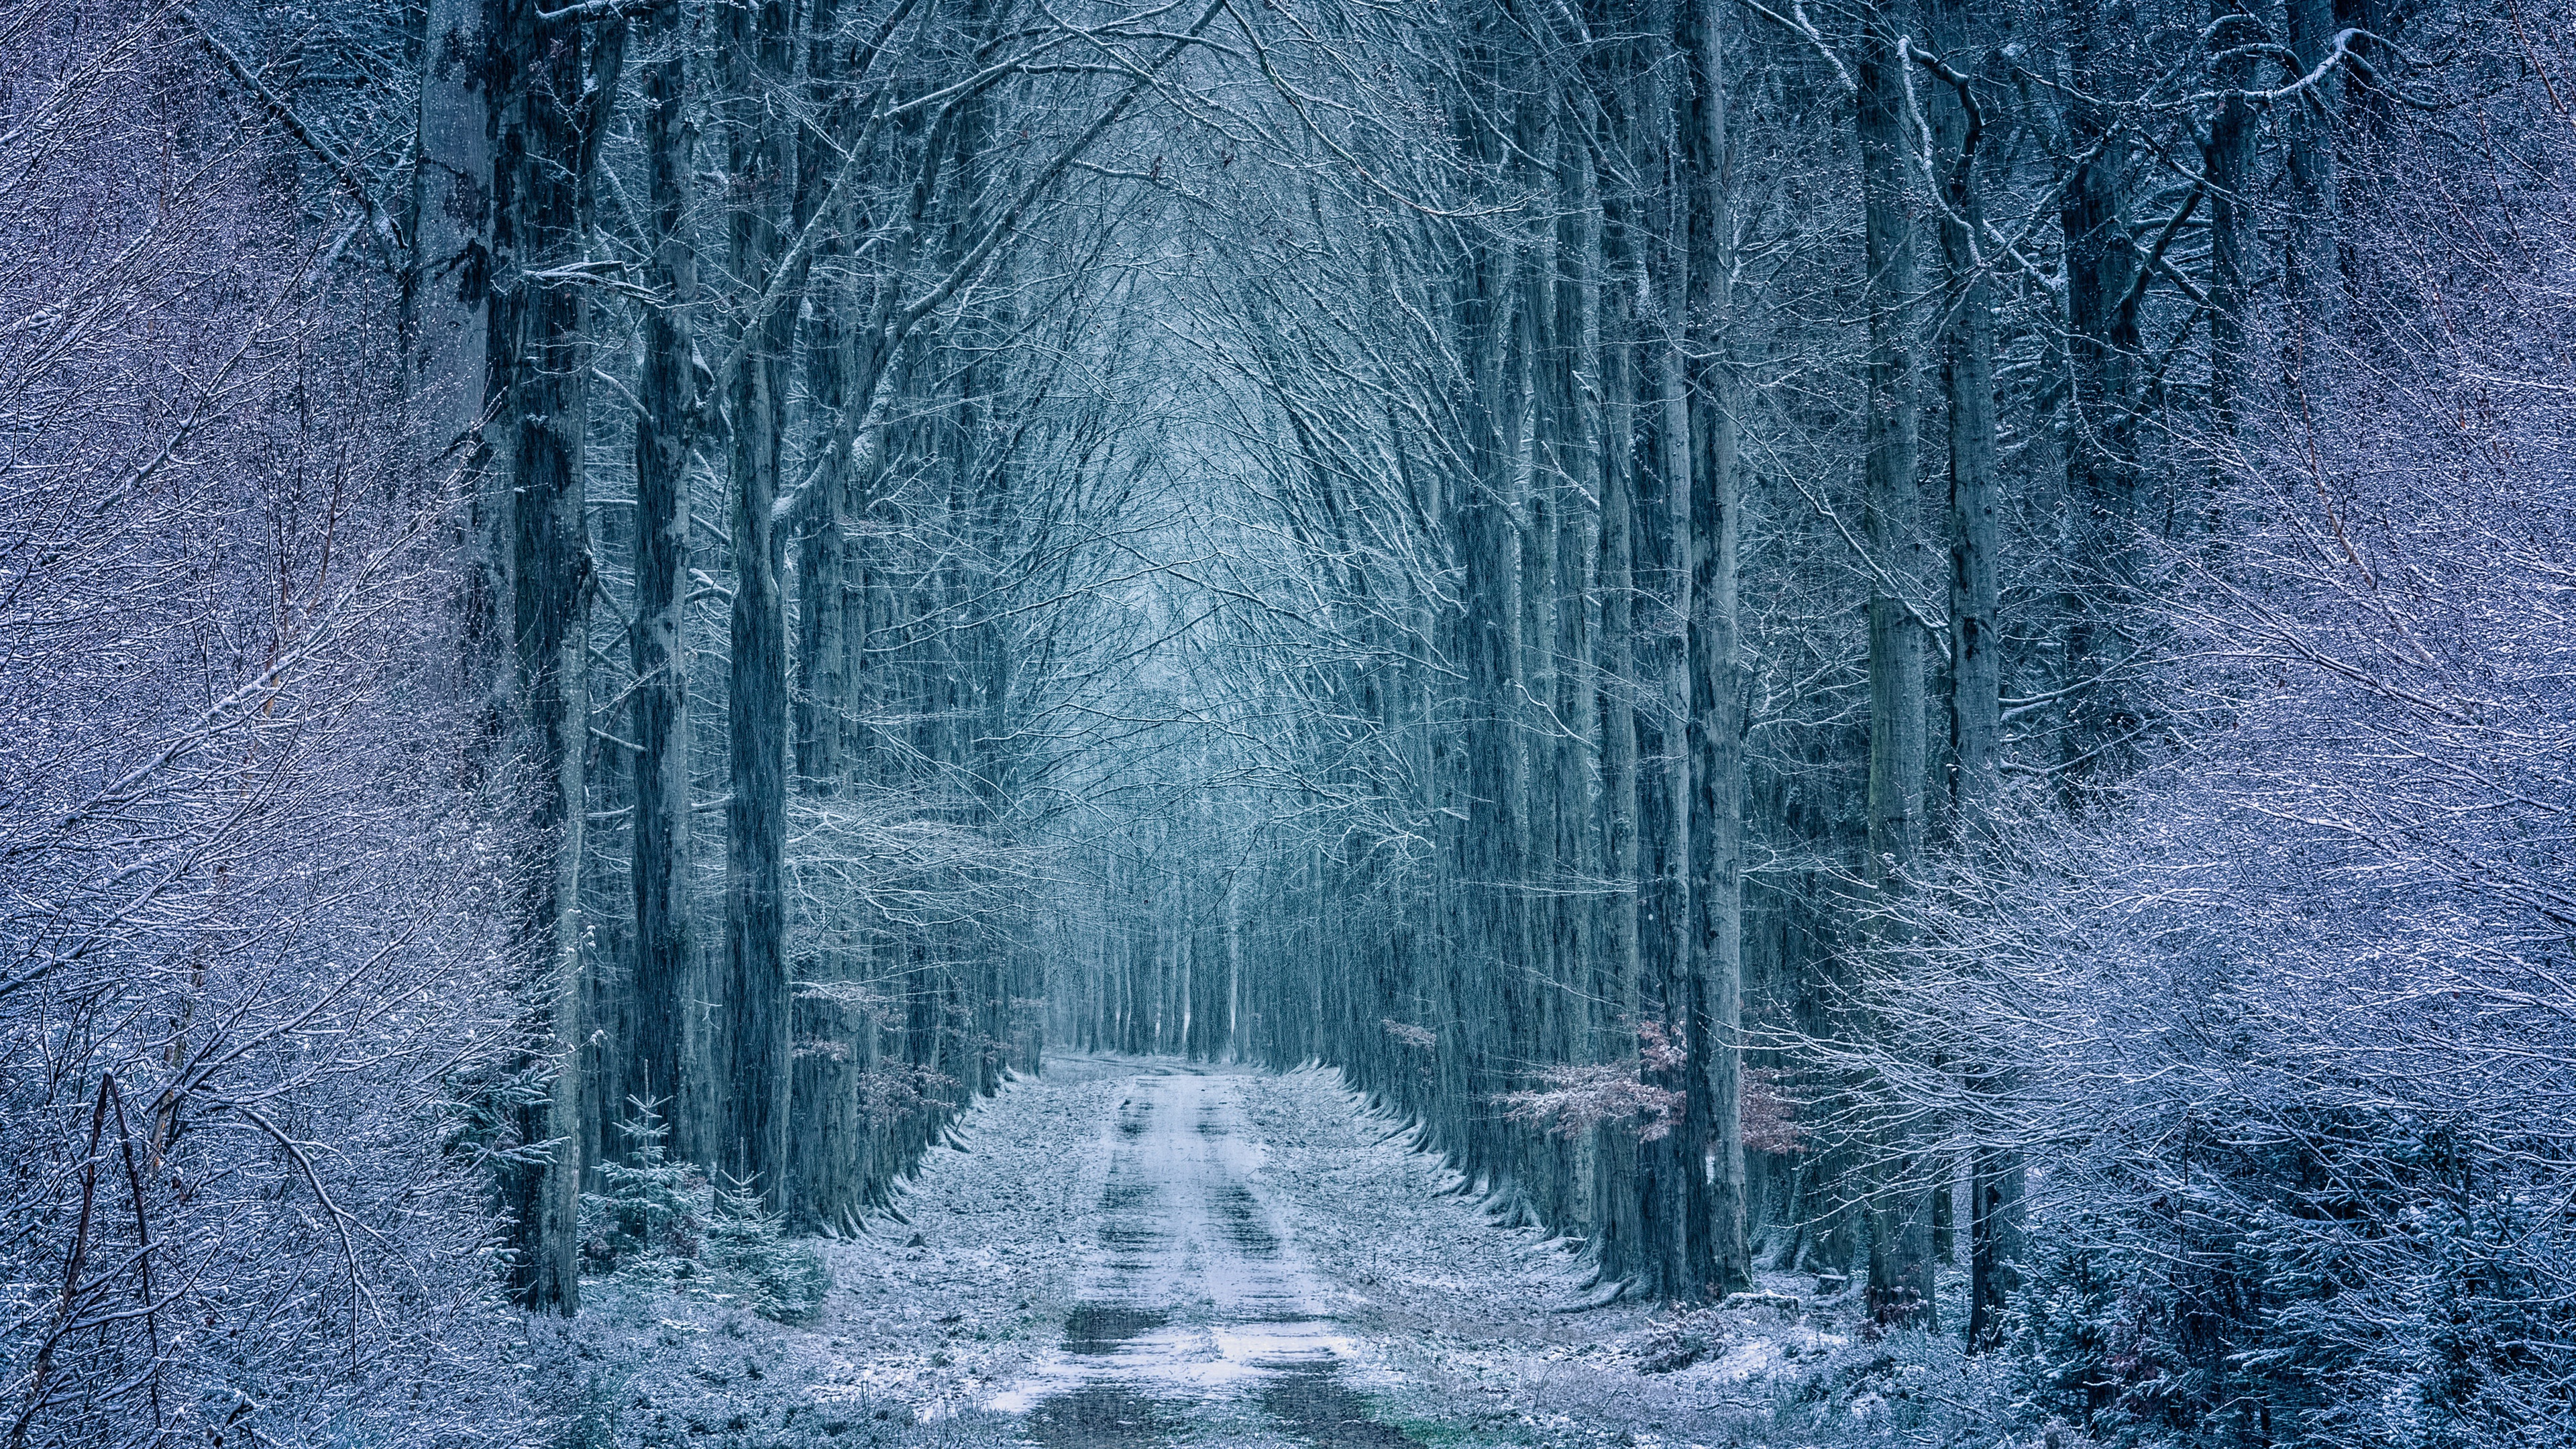 General 3840x2160 nature frost outdoors trees winter cold dirt road snow